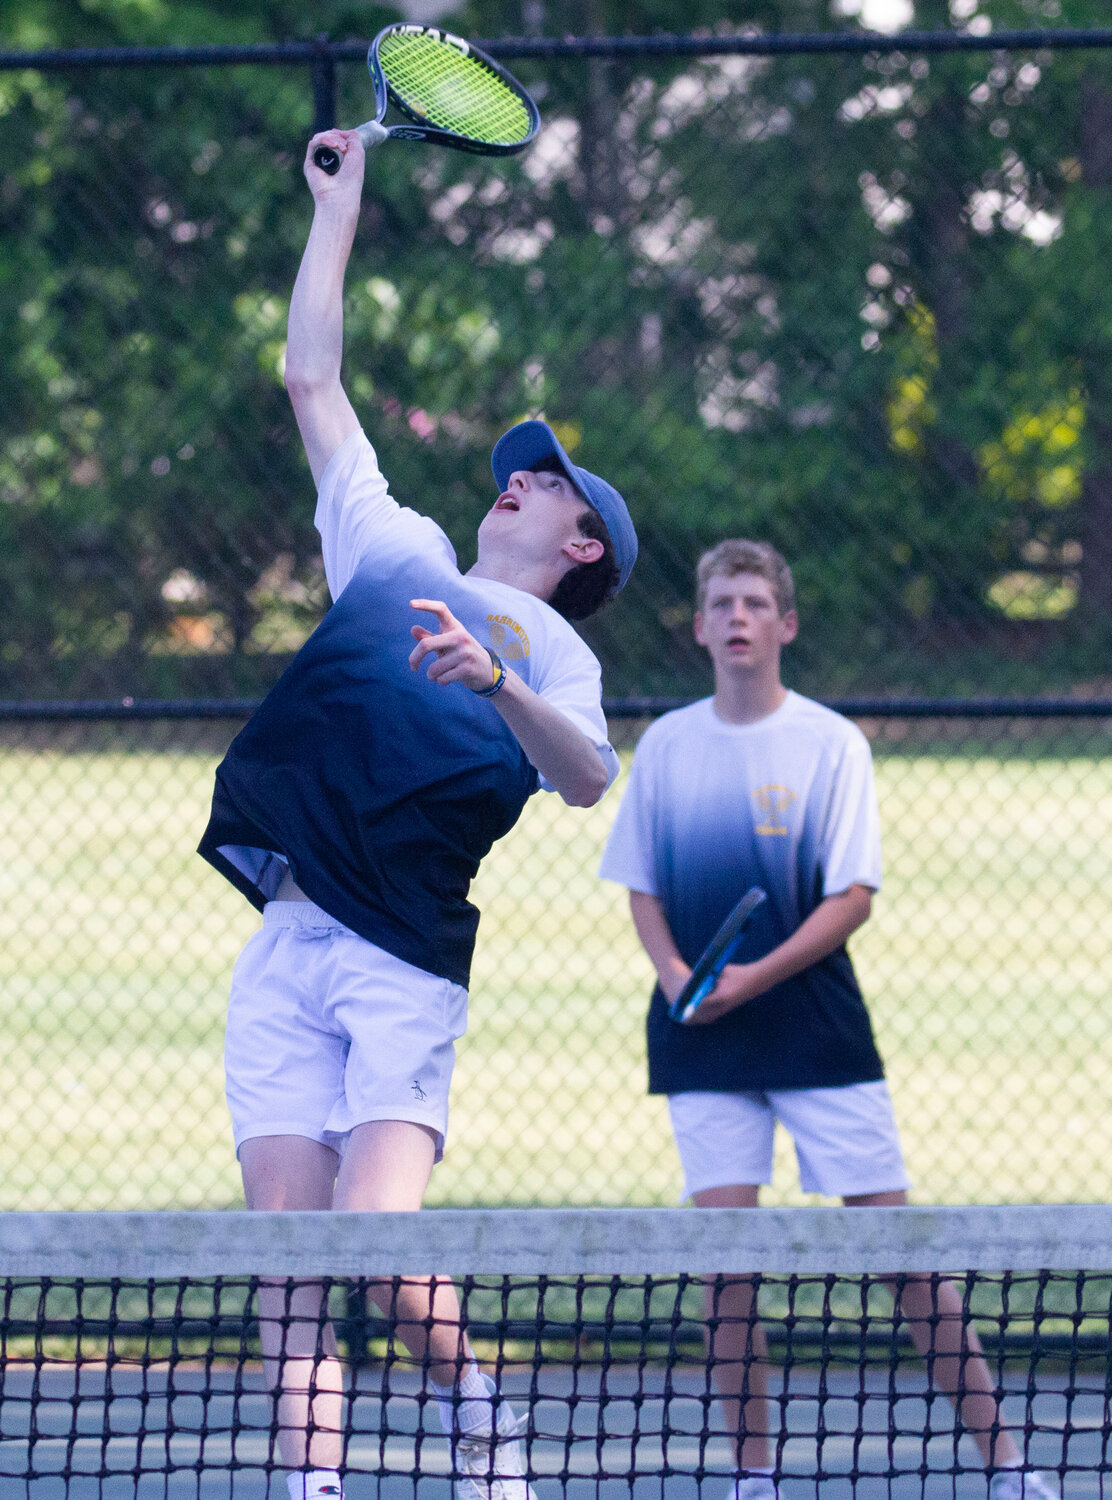 Barrington's Bryce Kupperman reaches for an overhead smash during a doubles match against Mount St. Charles. Gabe Anderson is in the background.